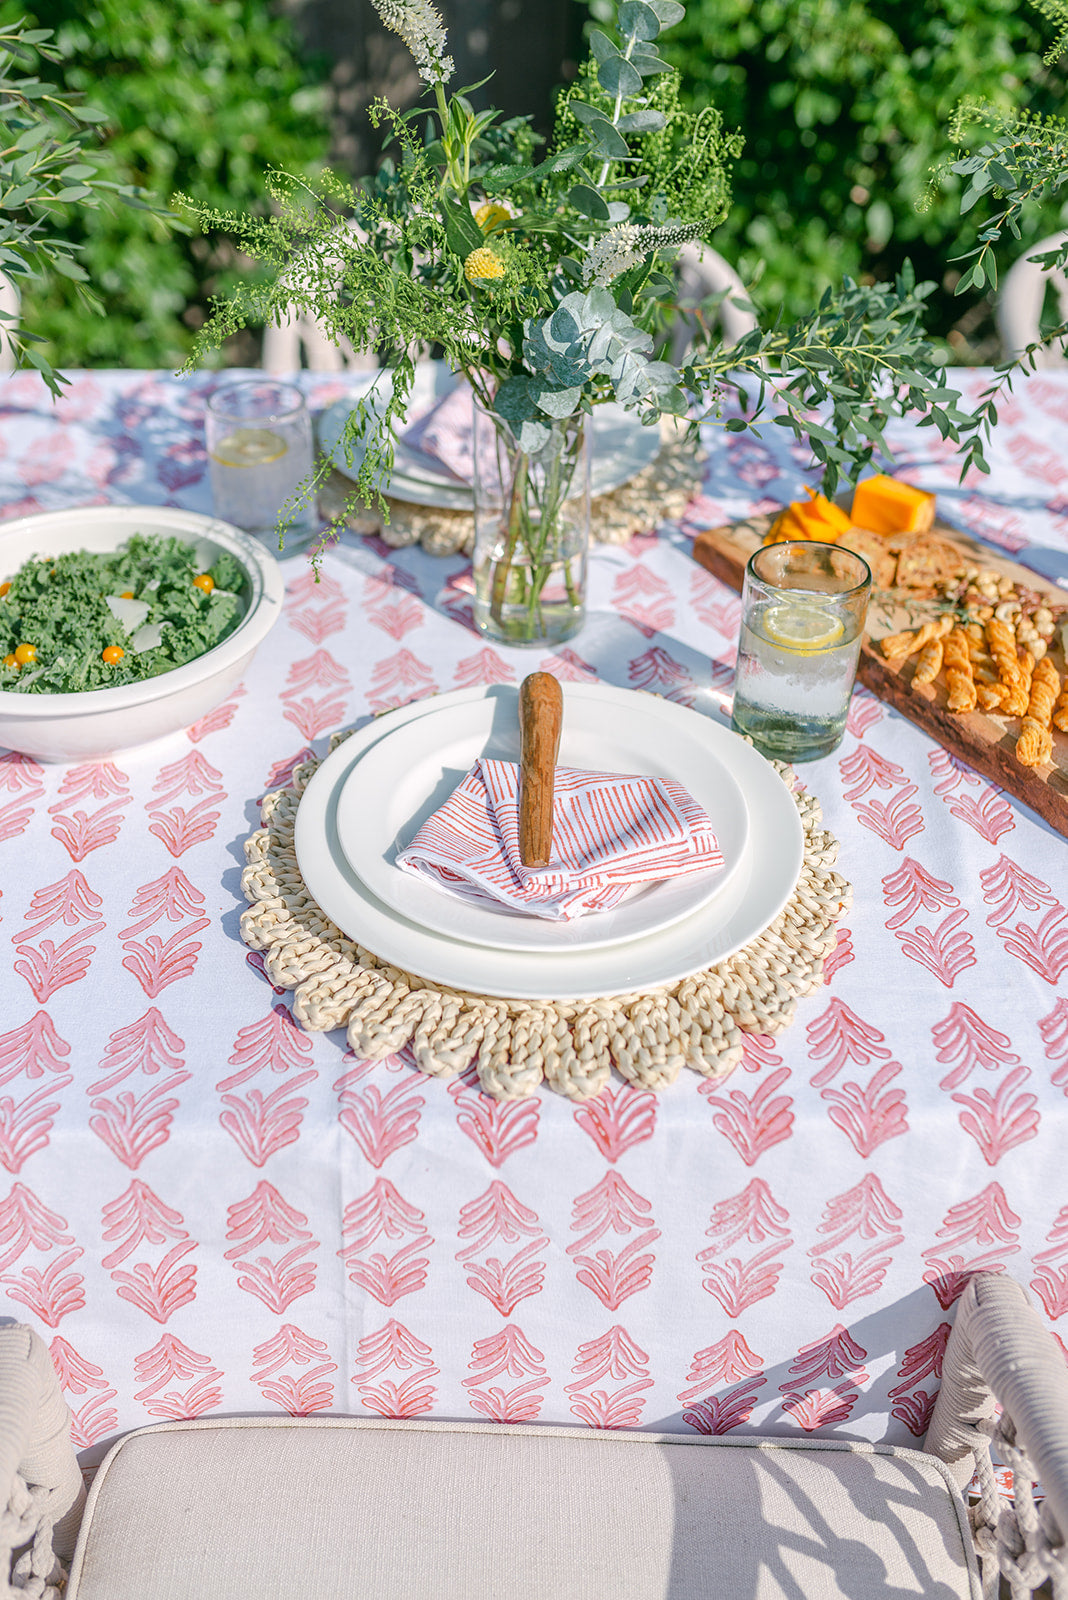 Tablecloth - Palmetto, Pink & Coral by Mended